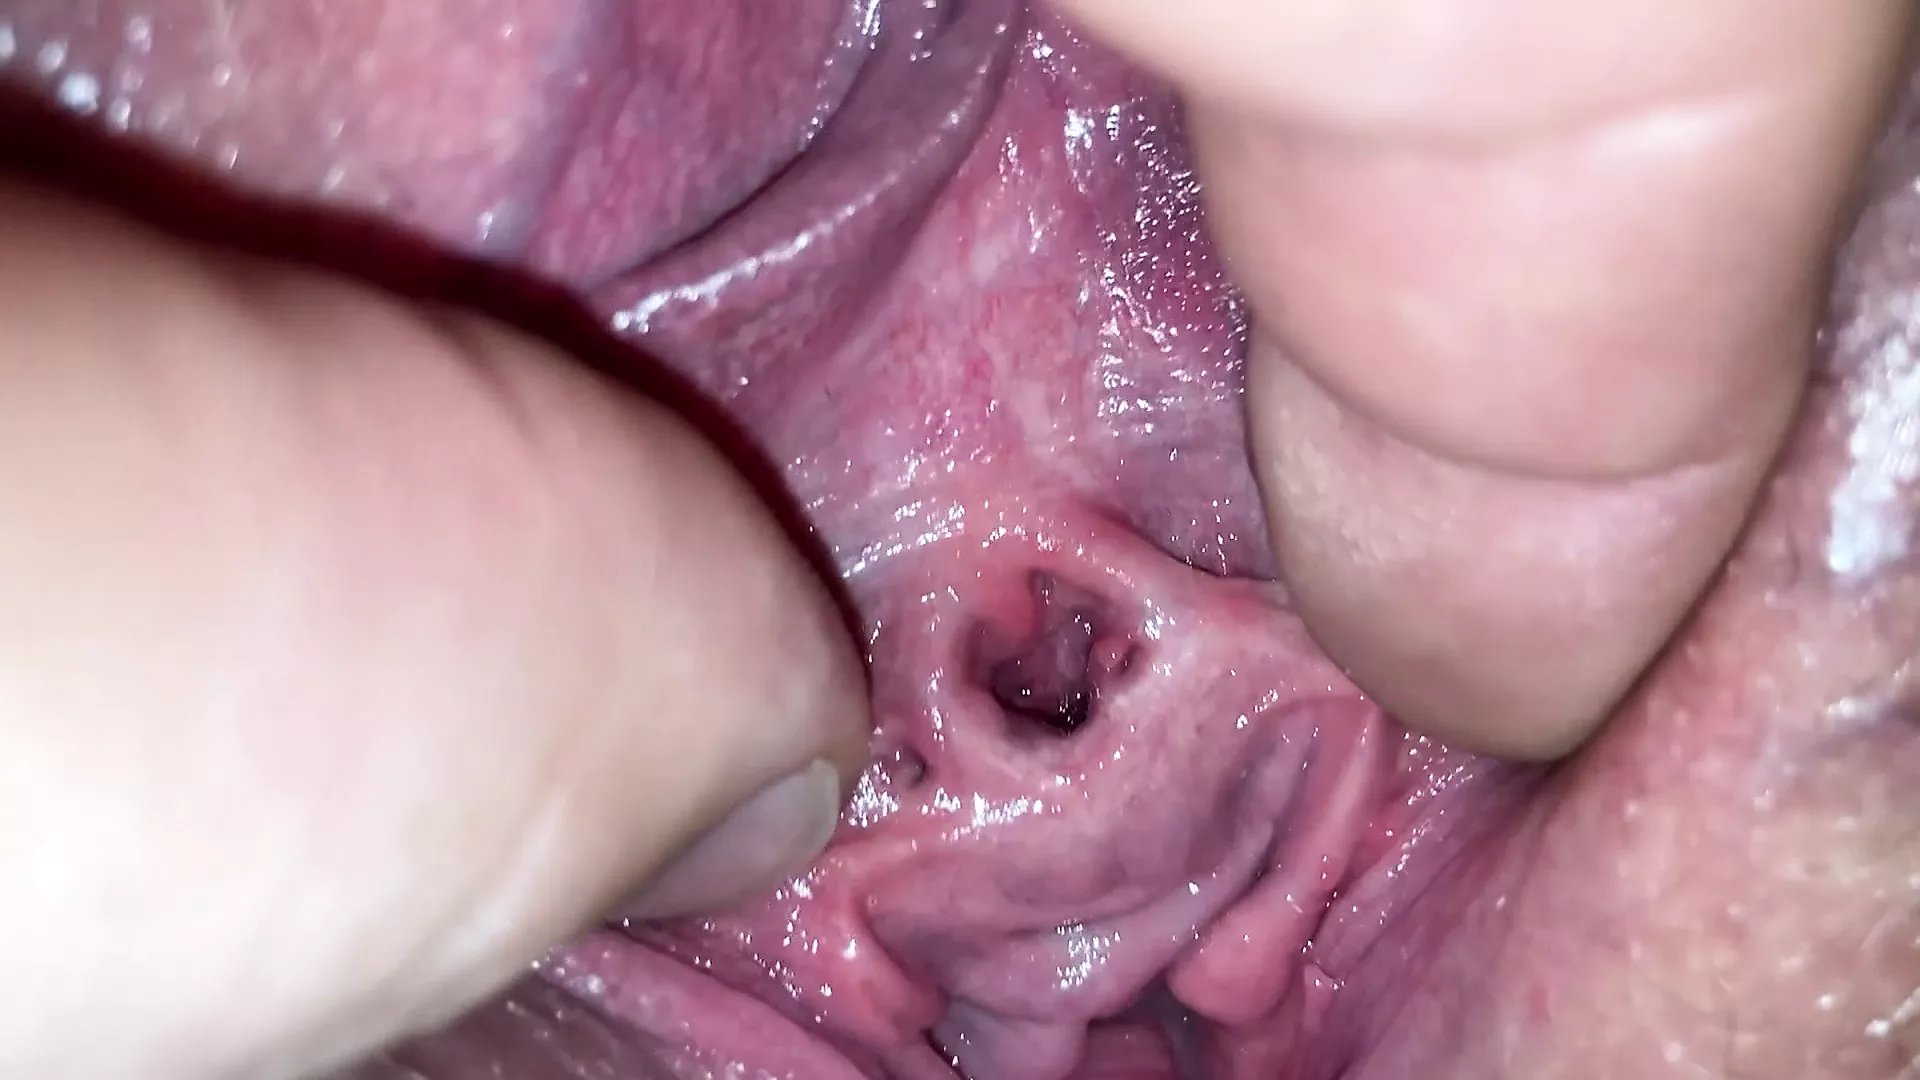 Exposed close up pov BBW open peehole fingering. BBW ass worship. Borr and Sirens Delight pic